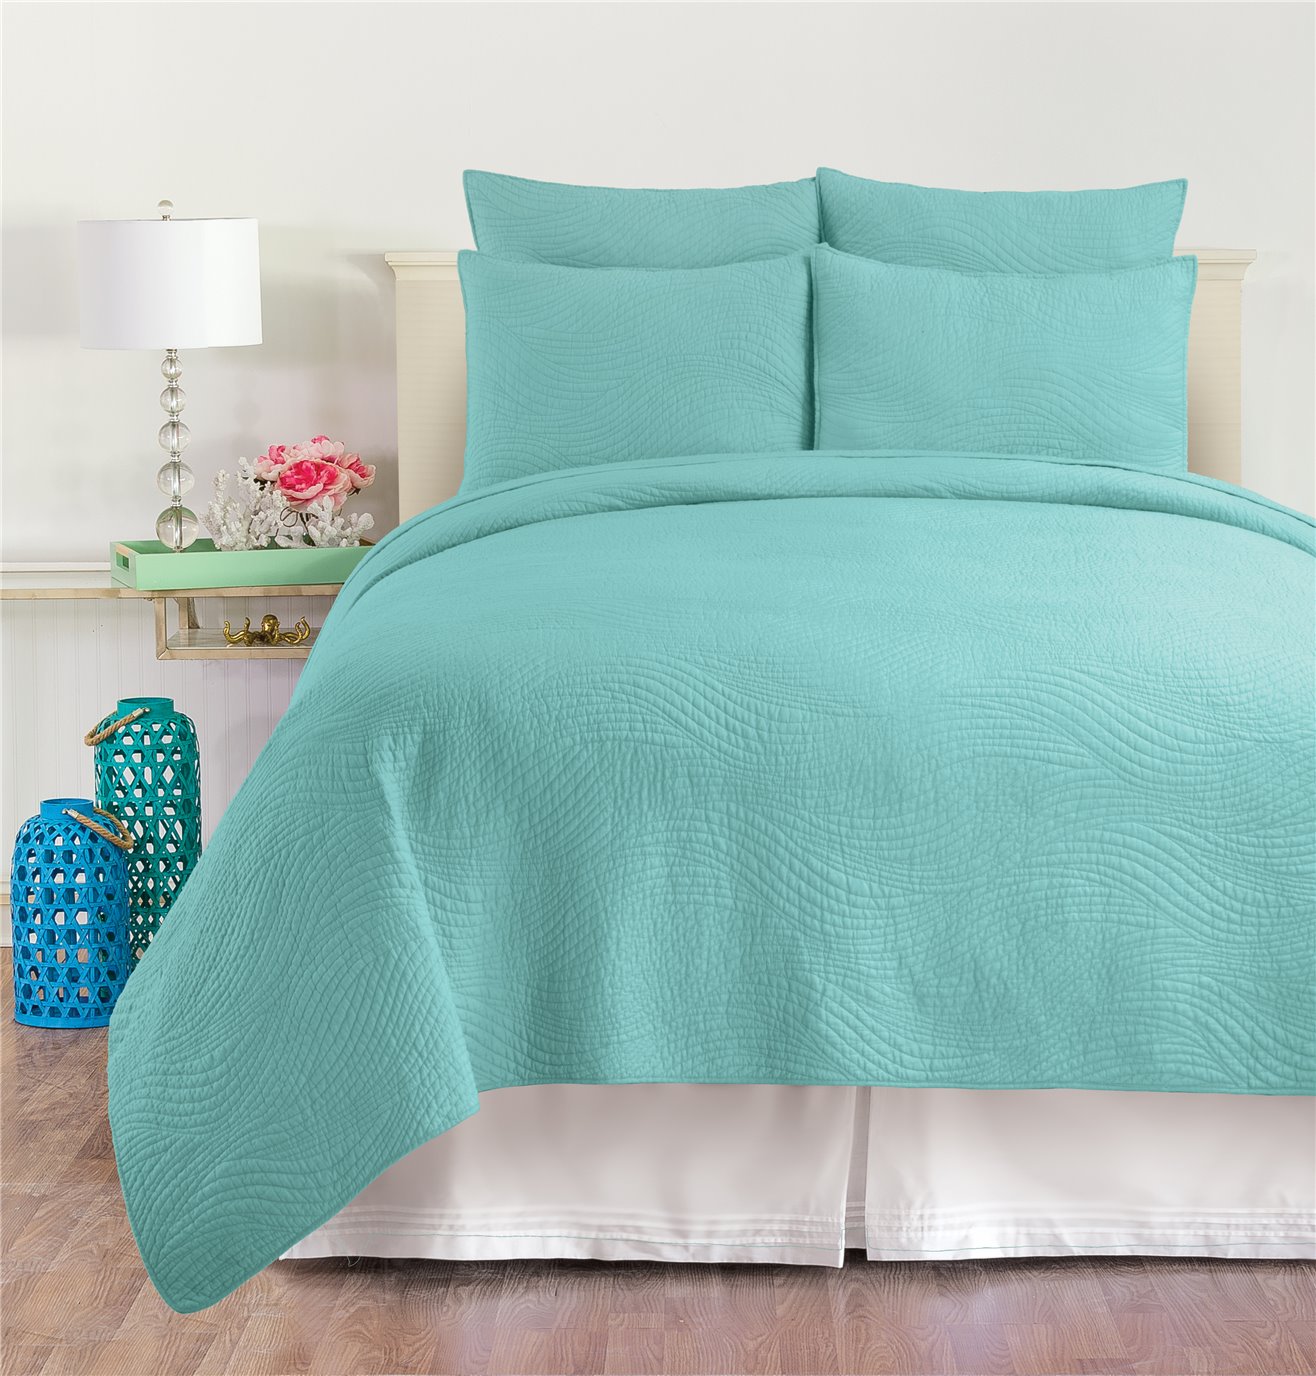 Tranquil Waves Aqua King Quilt Set by C&F Home